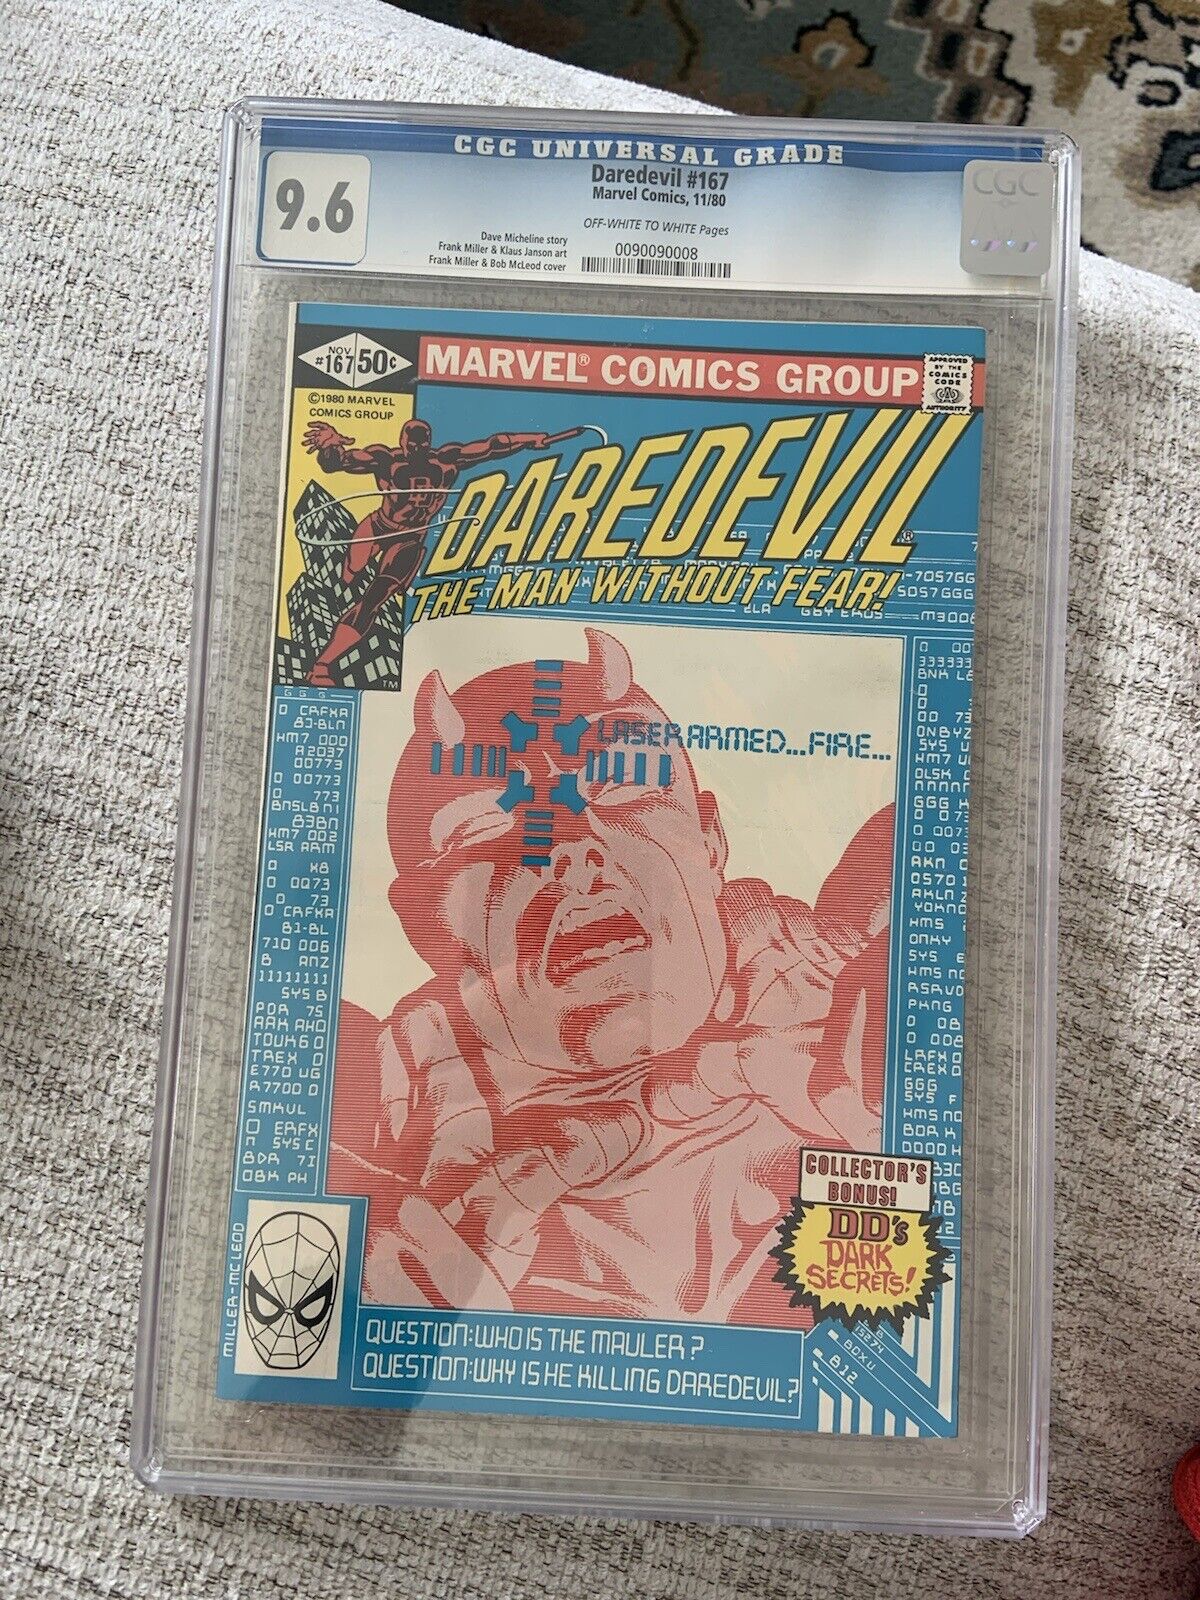 Daredevil #167 - CGC 9.6 - 1980 (1st Appearance of The Mauler)